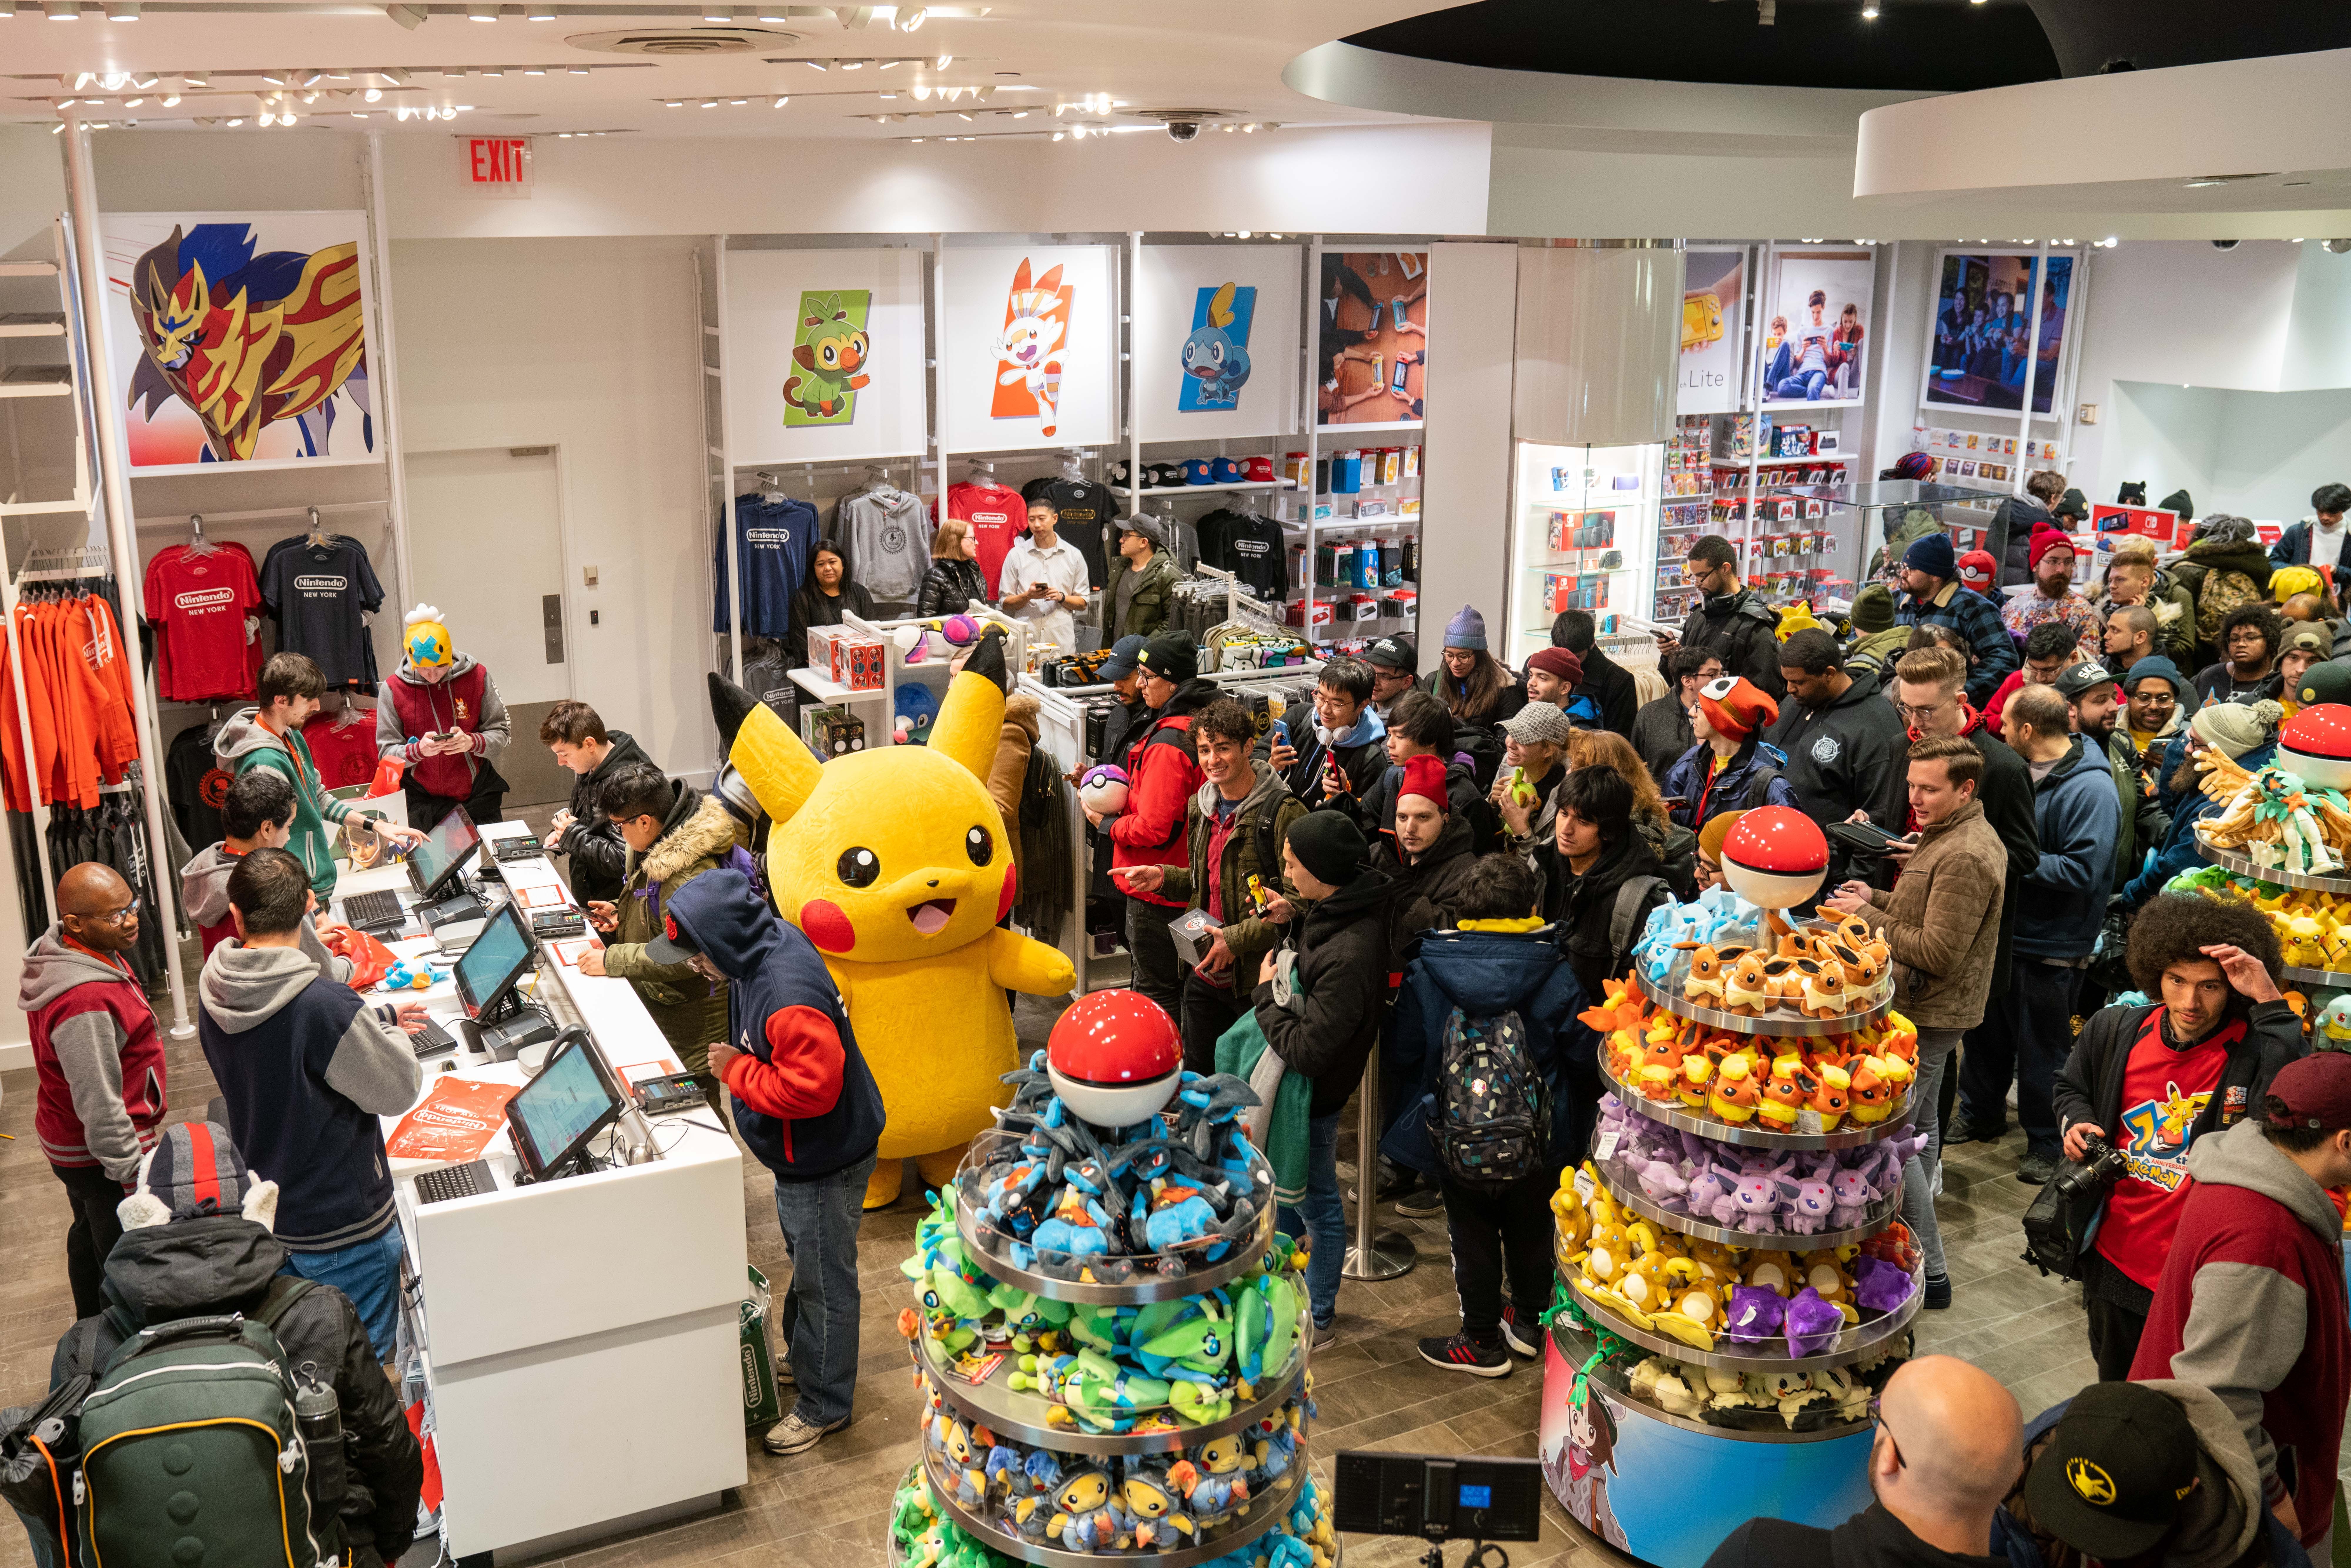 Nintendo Store NY hosting second floor private event on May 5th